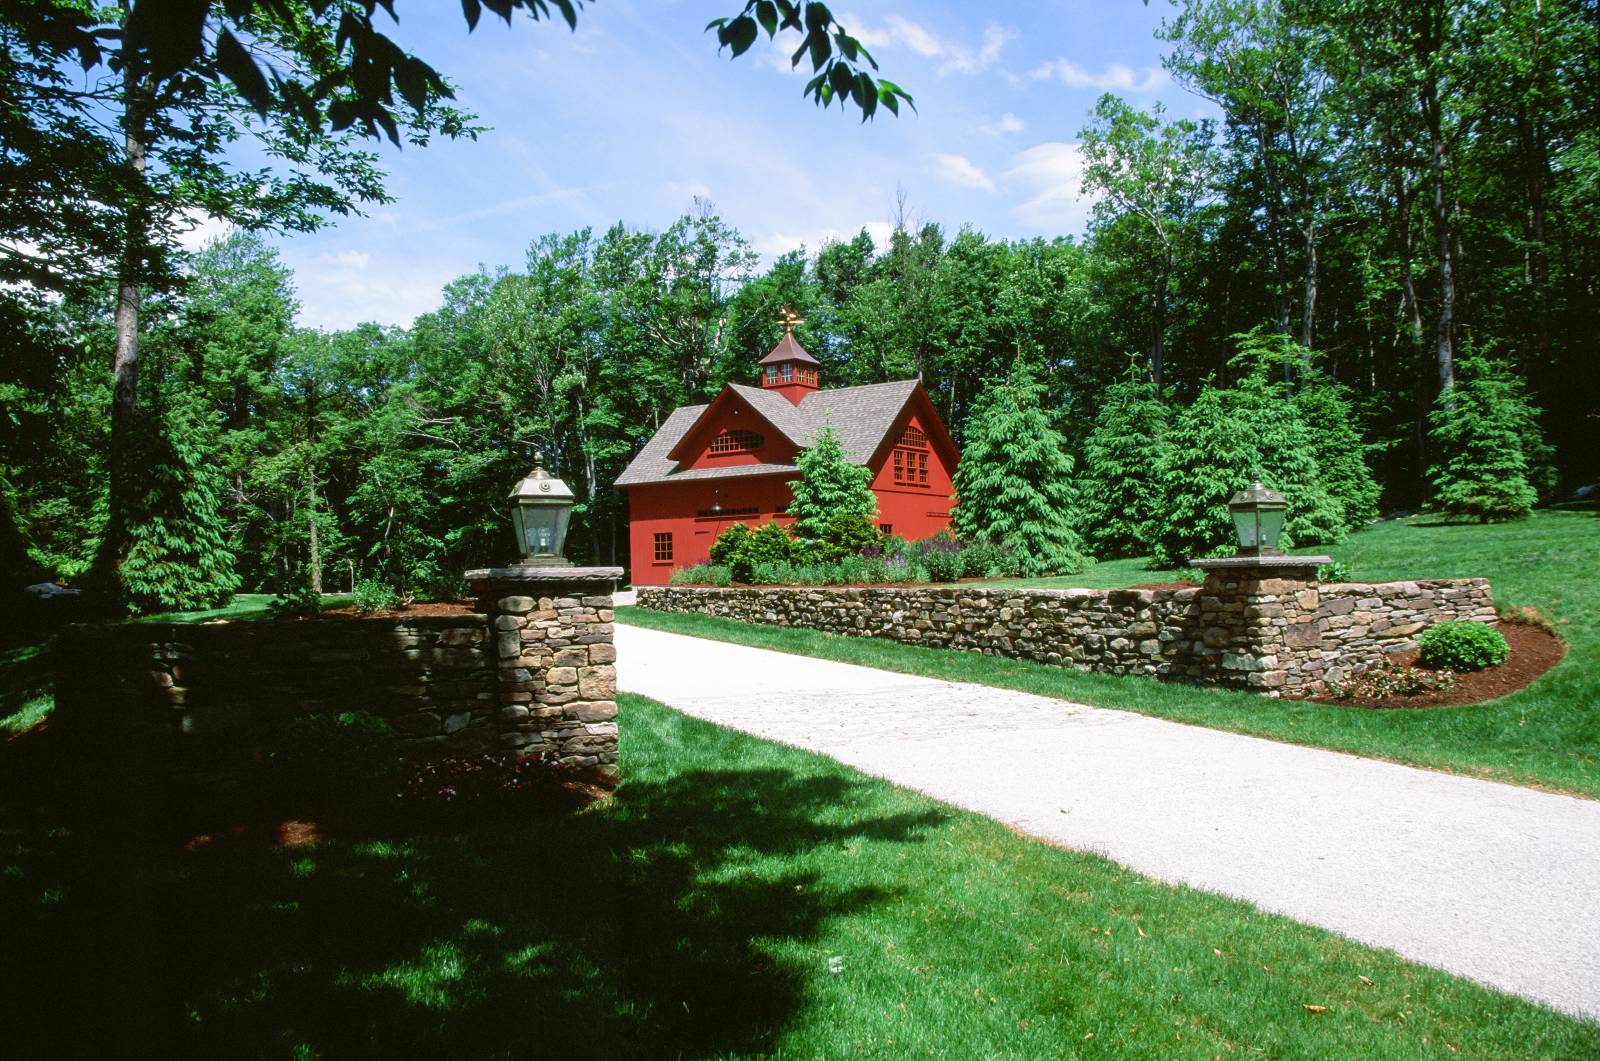 Driveway Approach to the Carriage Barn